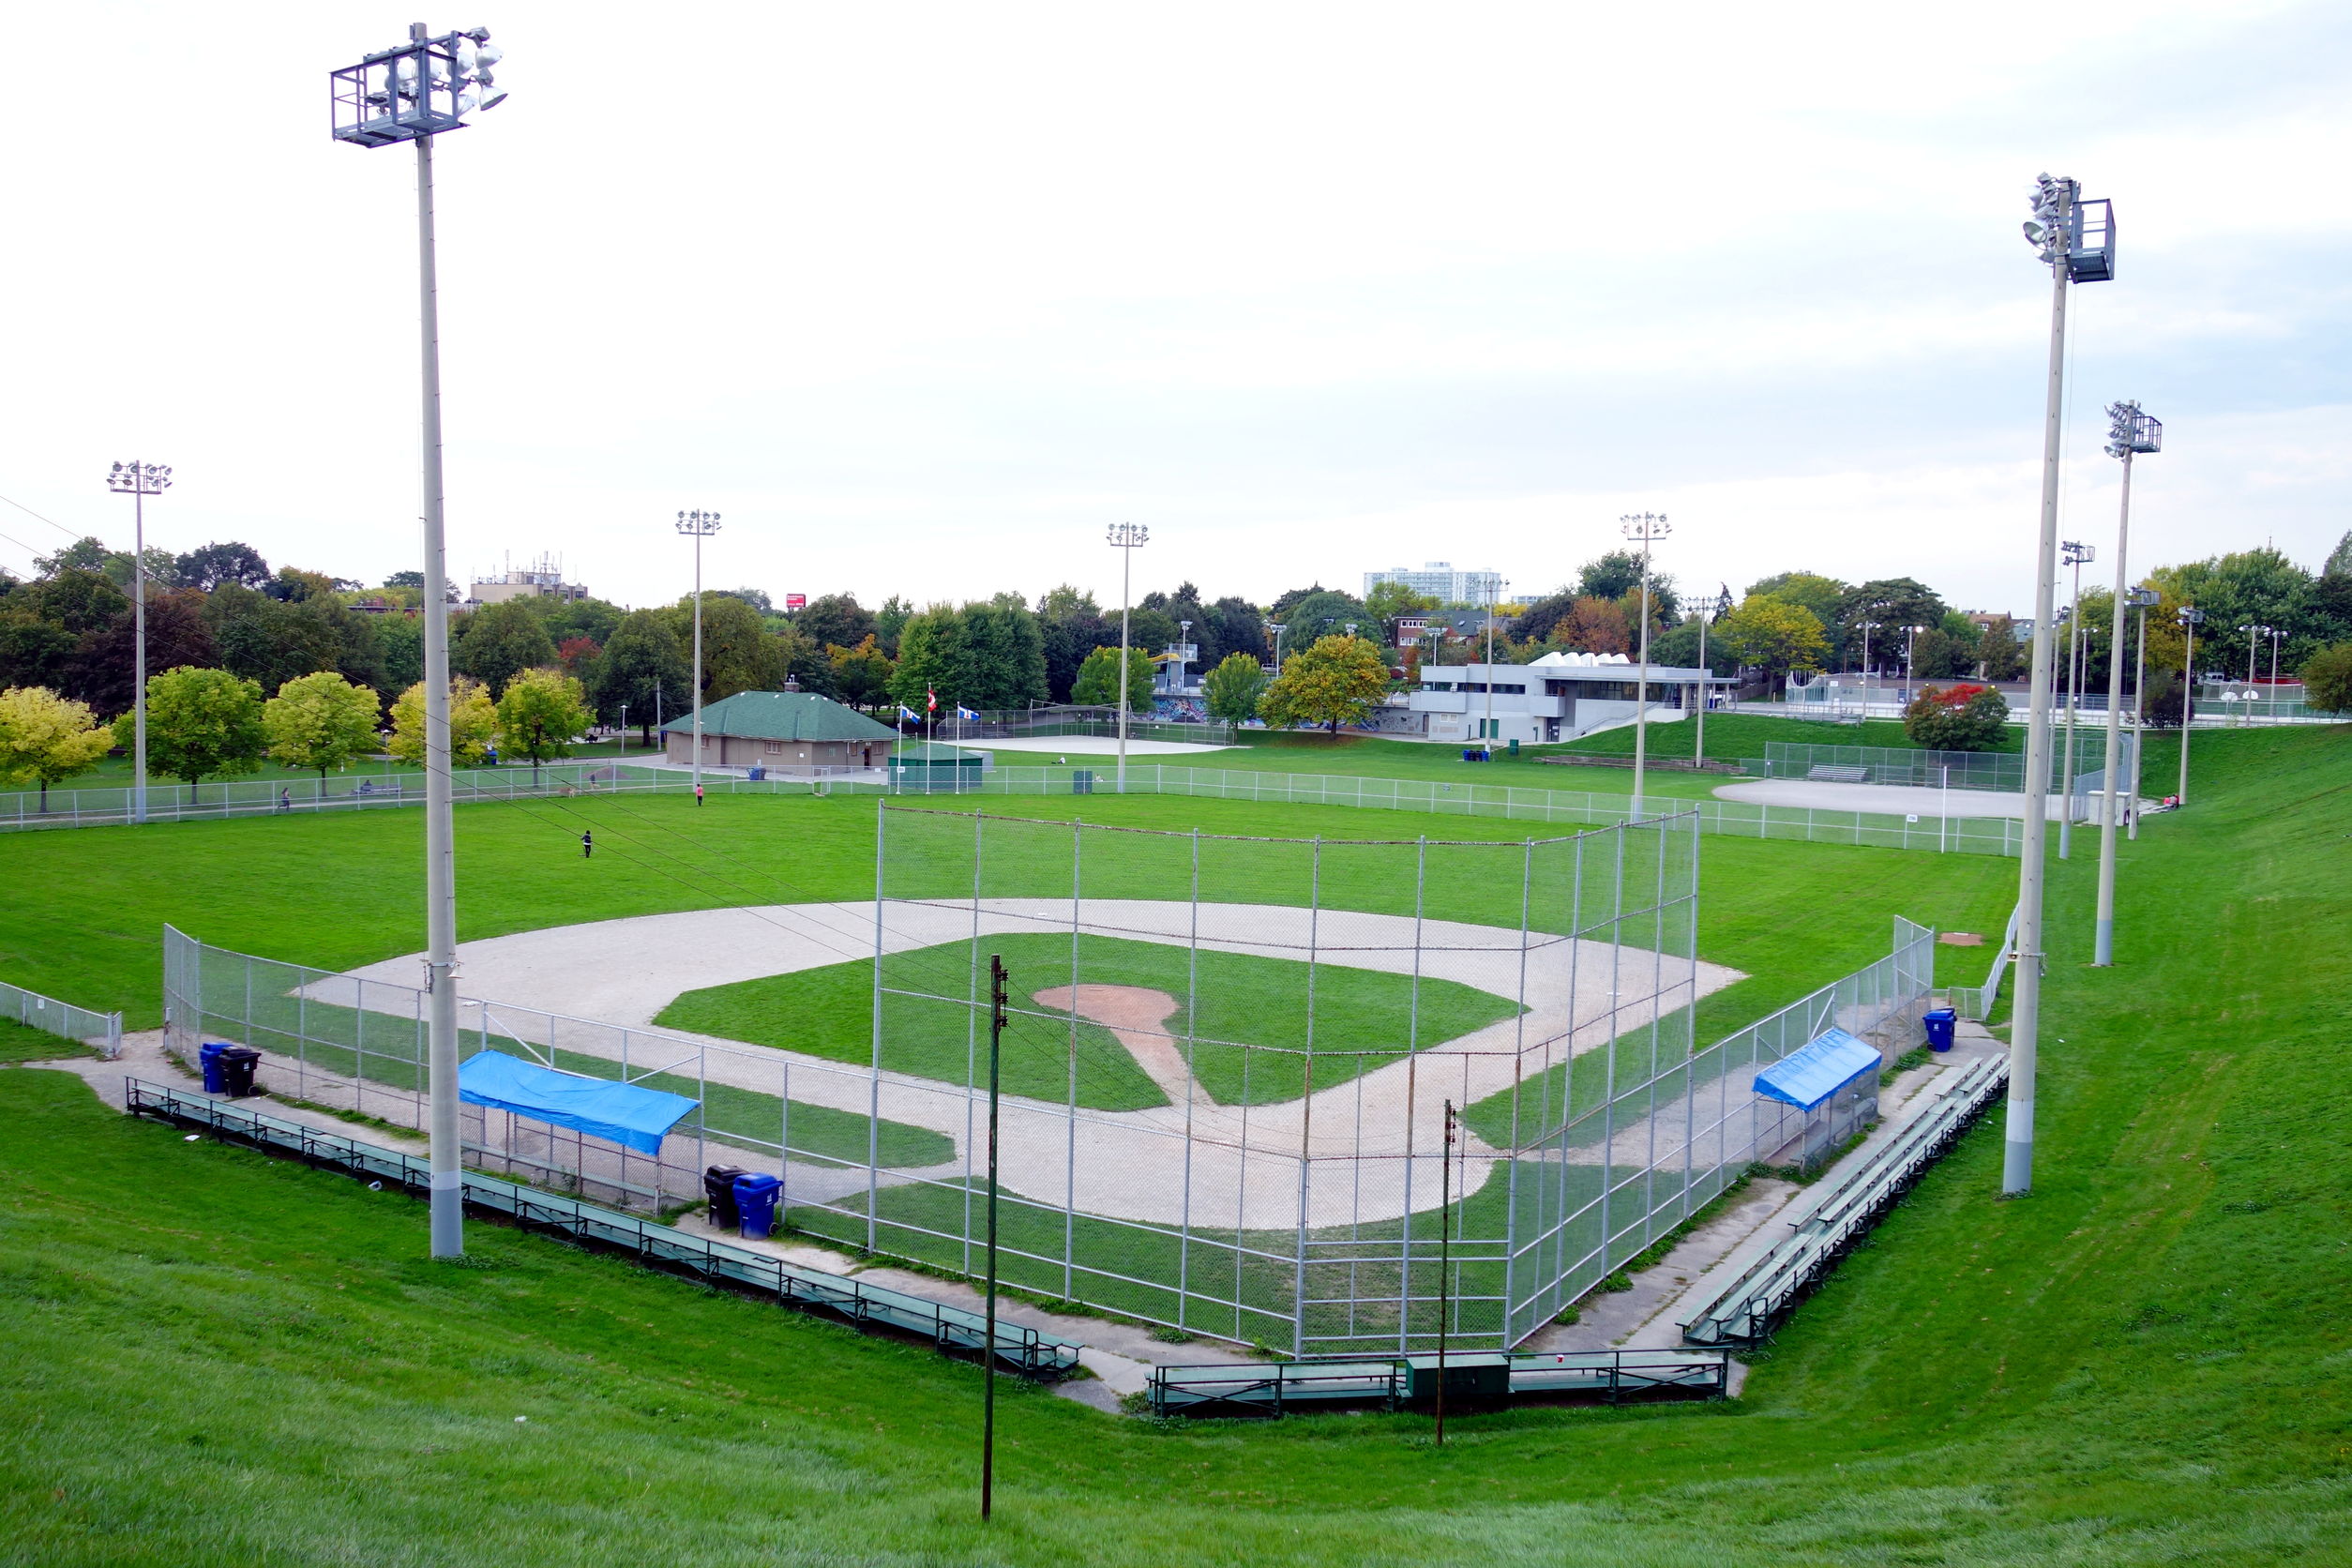 Little League Baseball Field Lighting Standards and Requirements